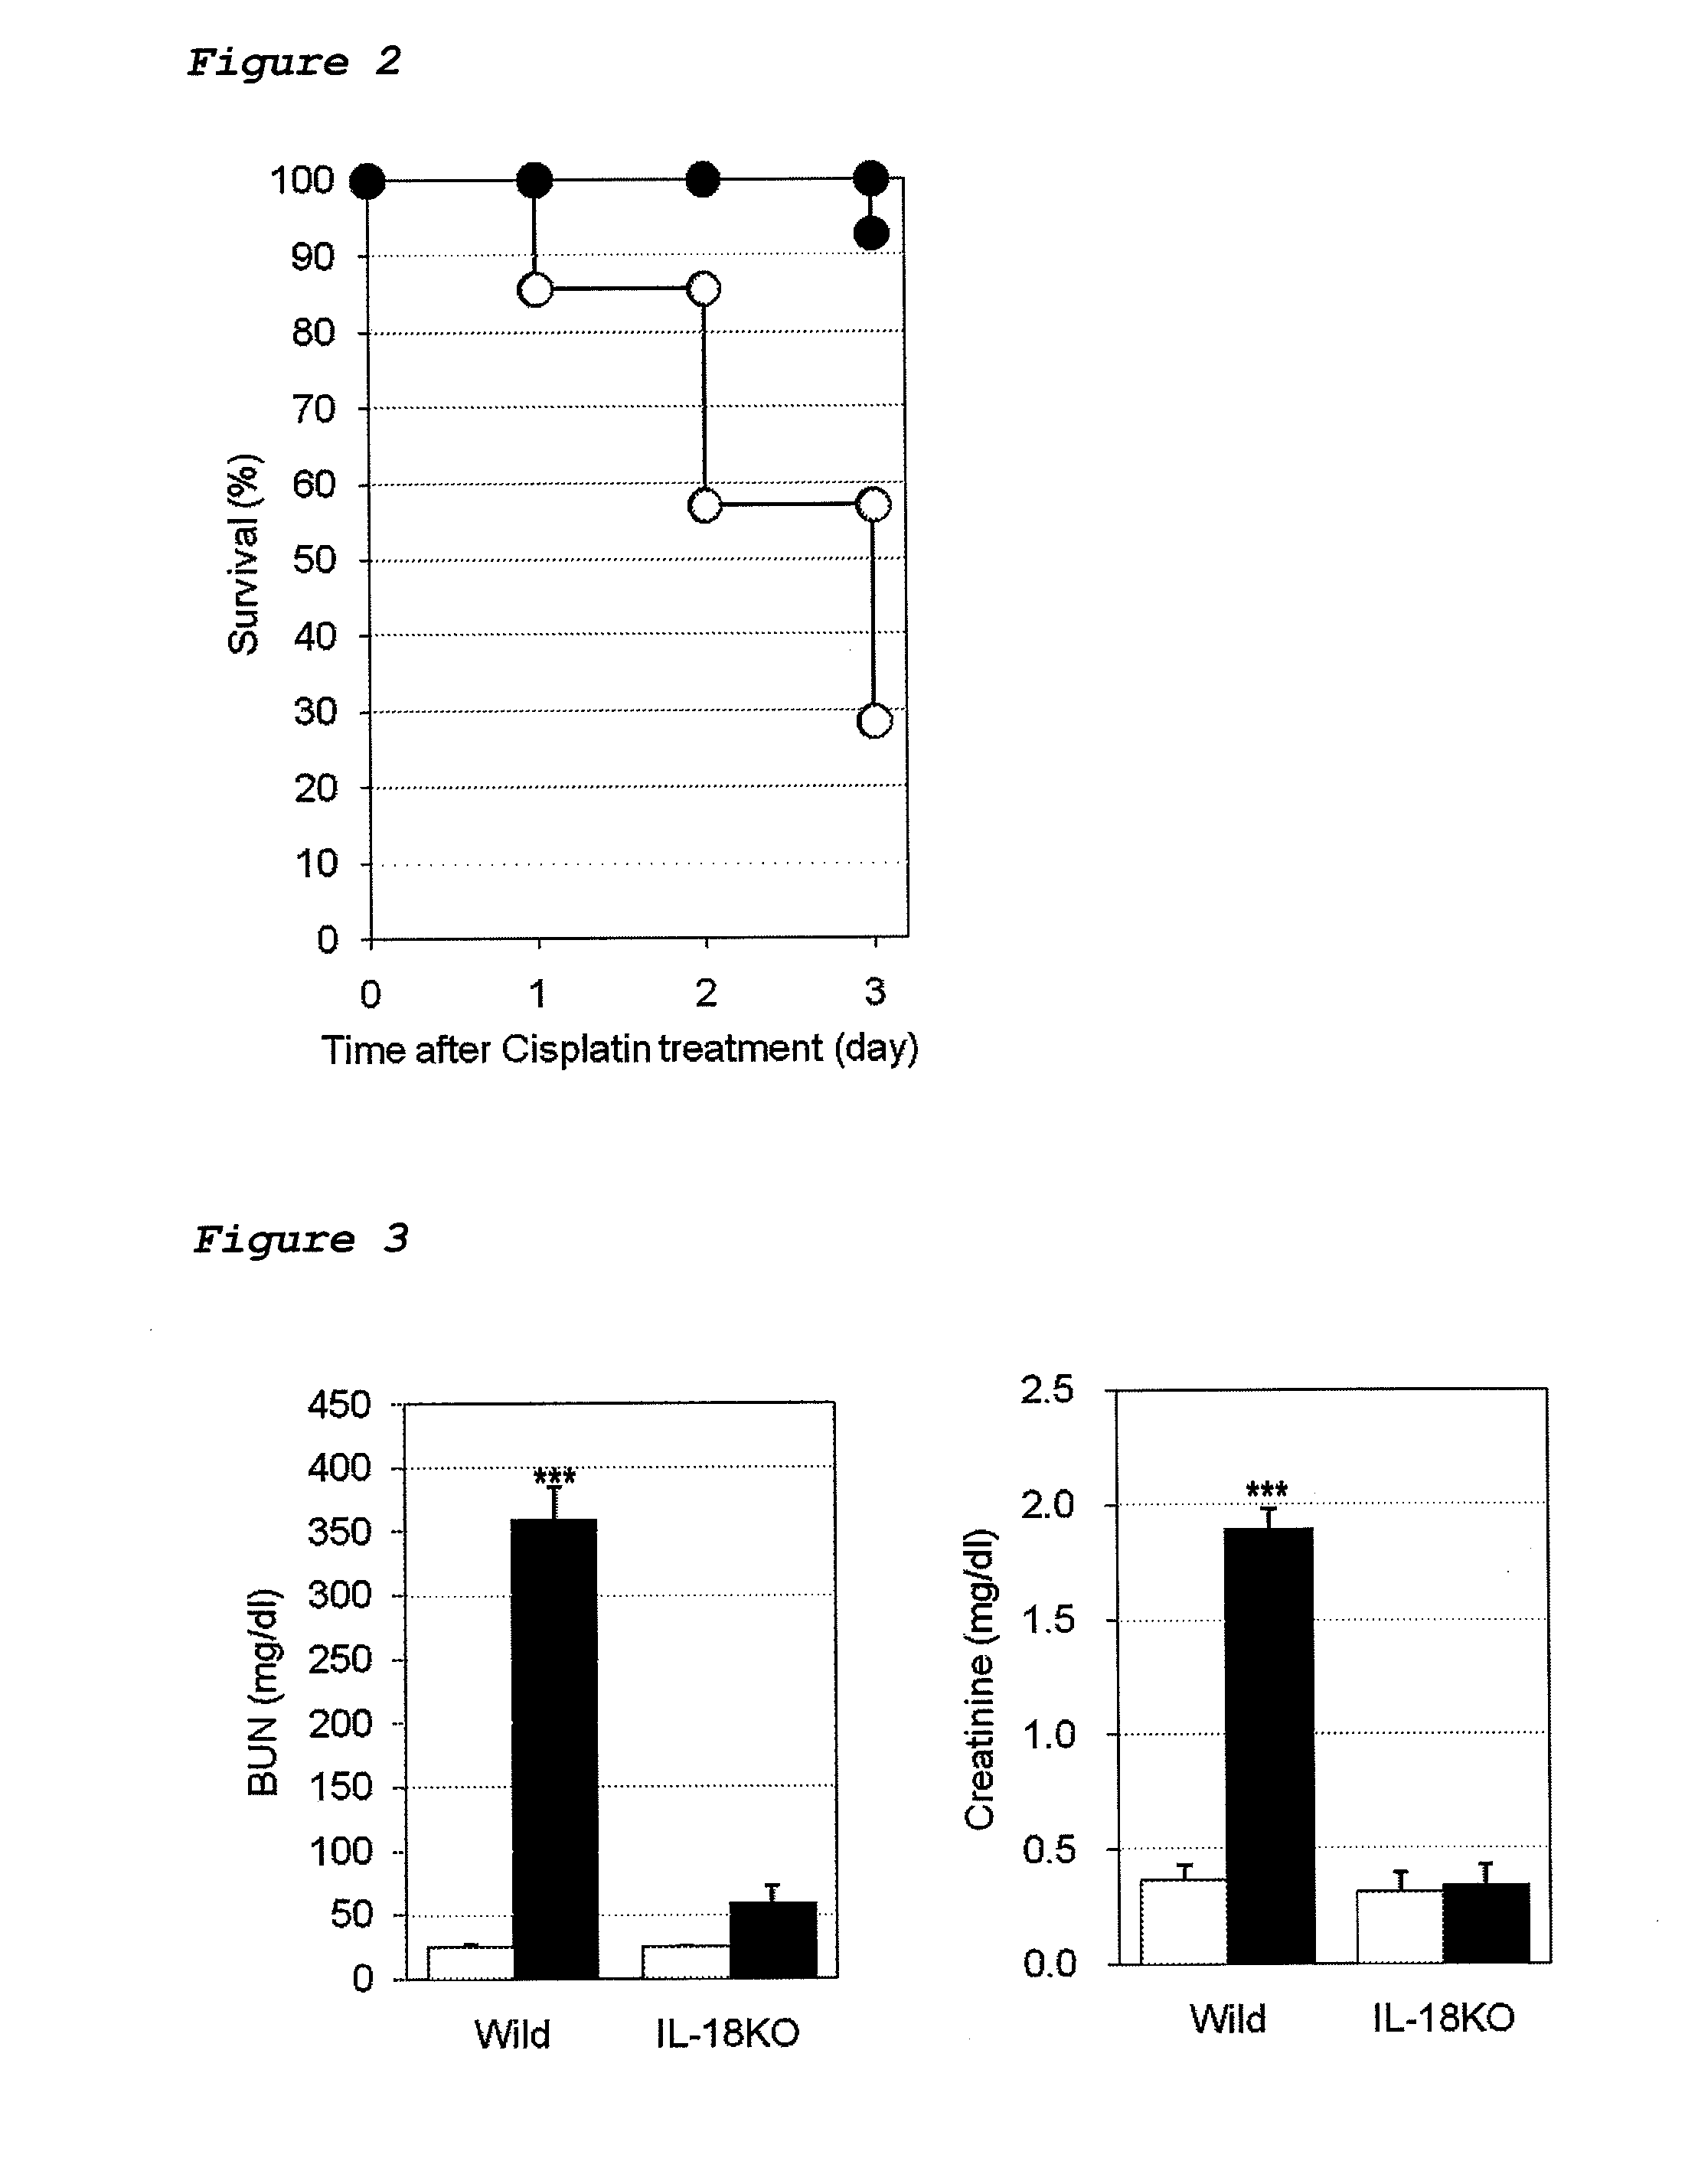 Method for preventing or treating cisplatin-induced nephrotoxicity